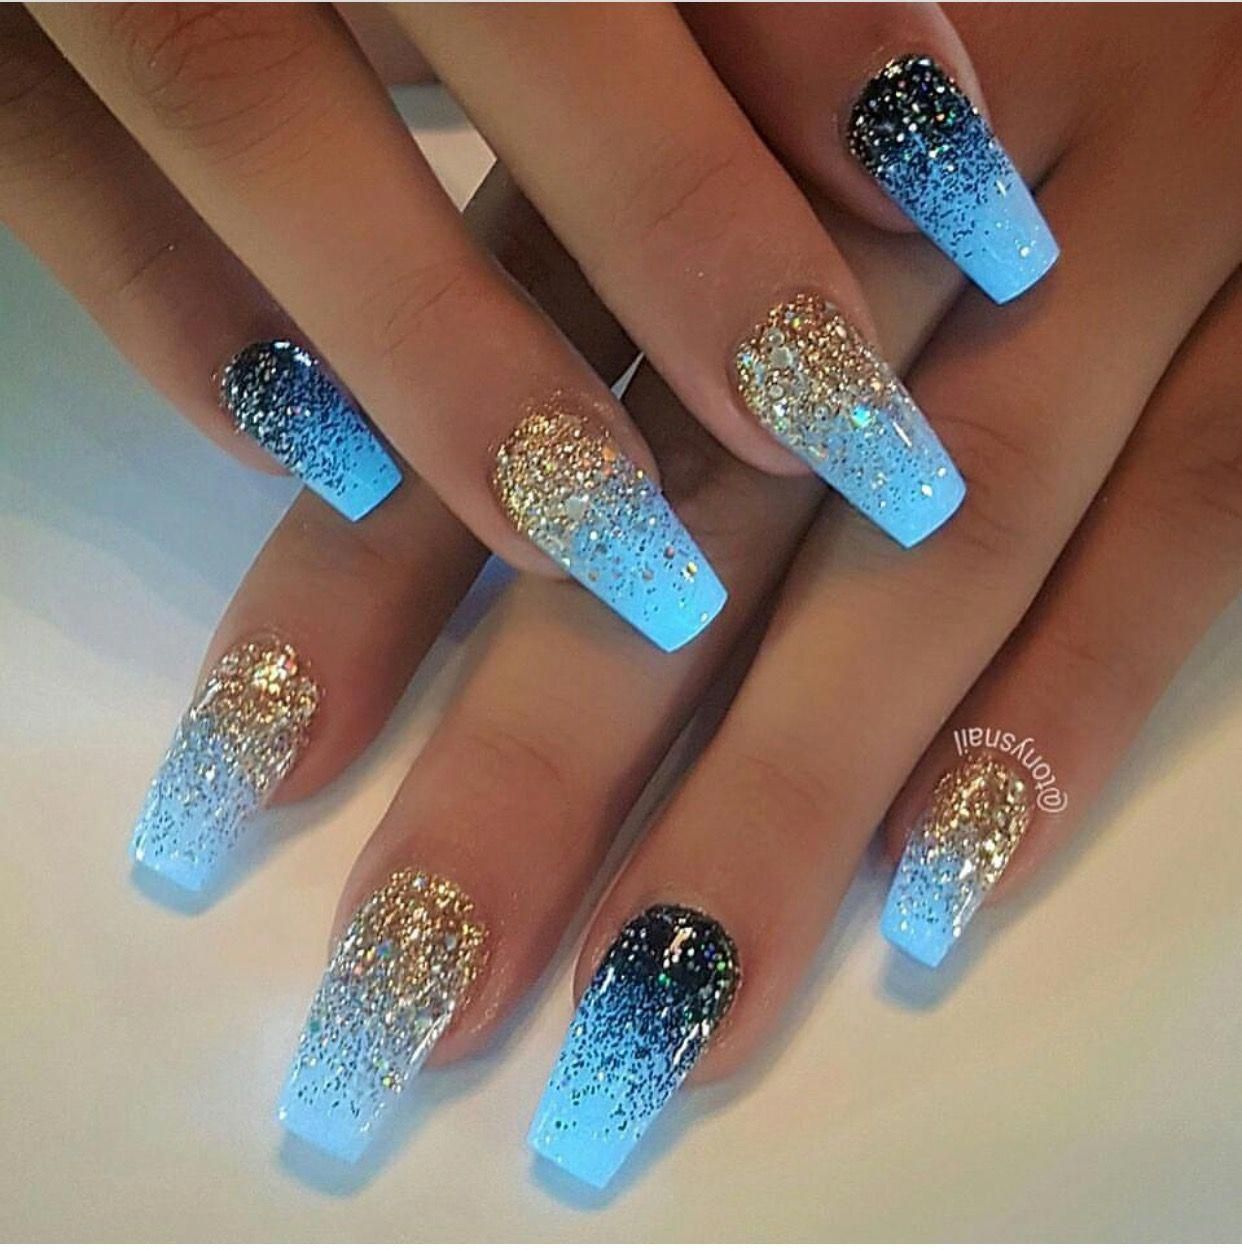 Blue Glow In The Dark Coffin Nails Manicure With Gold Glitter And Blue Glitter Ombre Effect Blue Manicure Mani Pedi Dlhe Nechty Nechtovy Dizajn Gelove Nechty